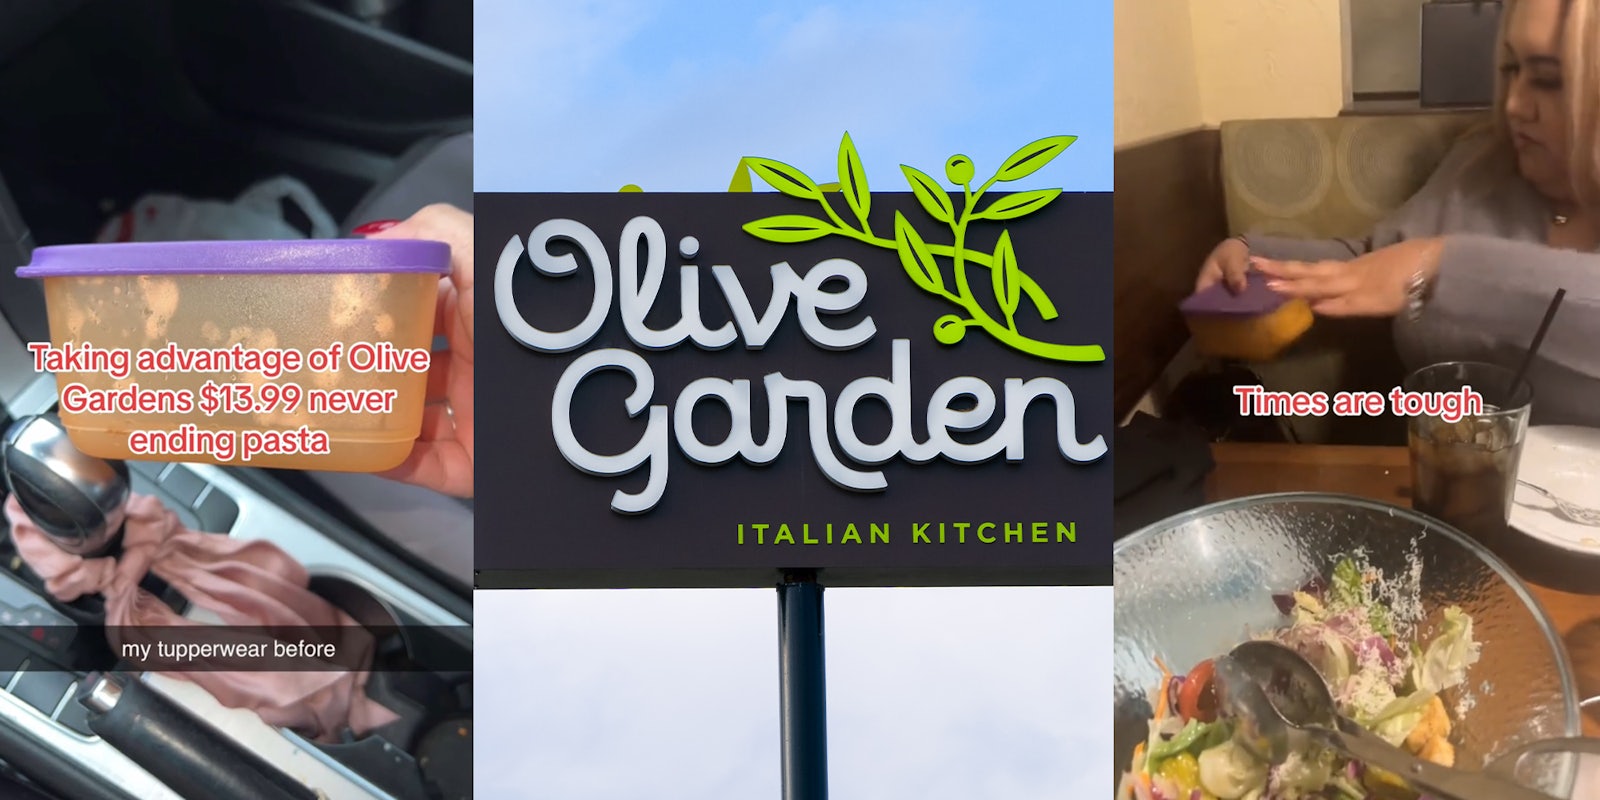 Olive Garden customers fill Ziploc bags, Tupperware with 5 servings of never-ending pasta